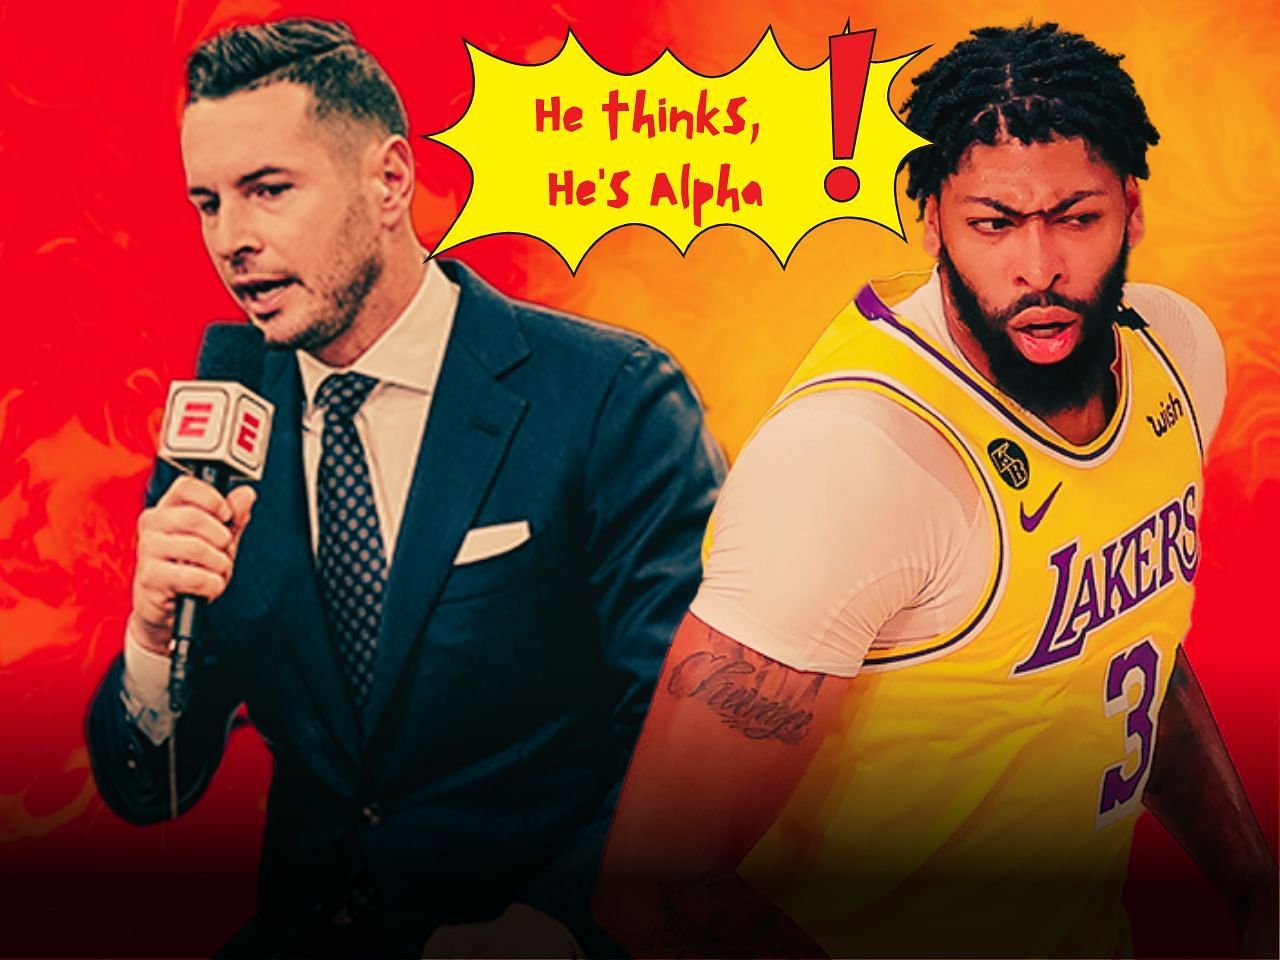 JJ Redick says Anthony Davis does not have what it takes to be the number one on a team.